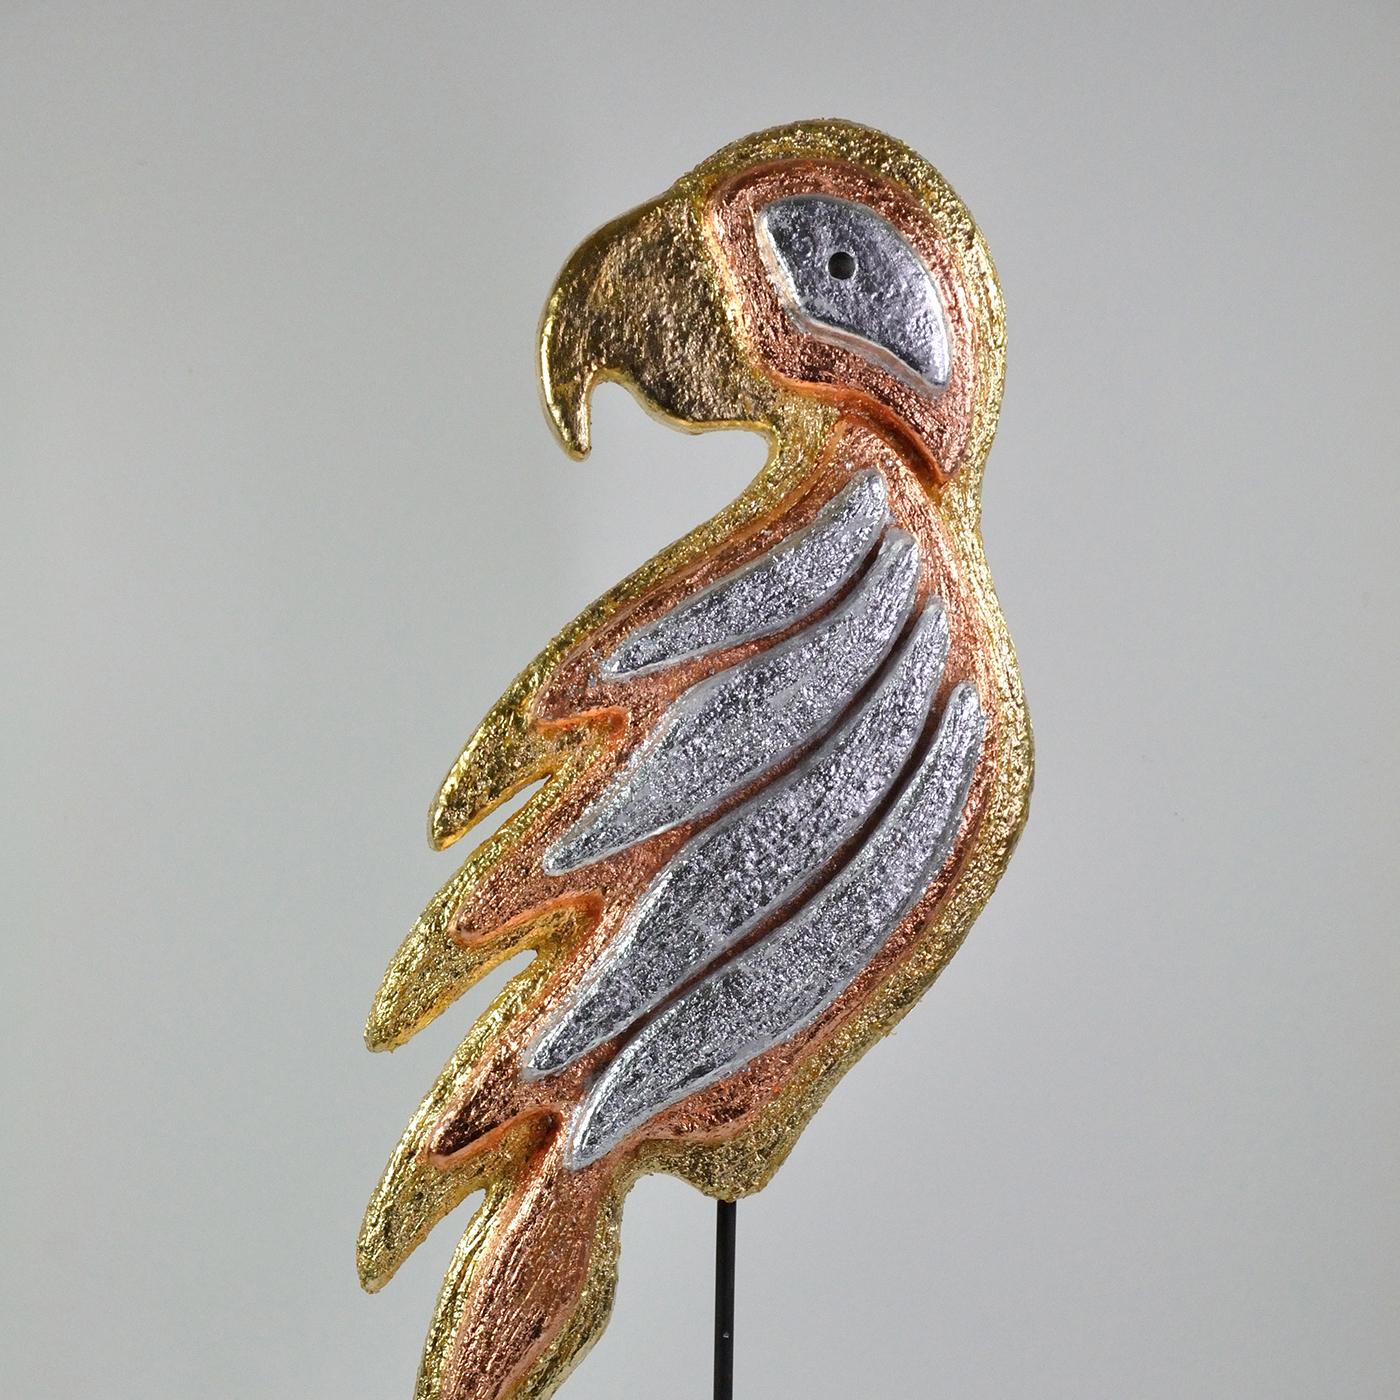 Evoking exotic atmospheres, this zoomorphic sculpture in the shape of a multicolor parrot is a deft showcase of craftsmanship enriched with a combination of silver, gold, and copper leaf that lend it its alluring shimmering quality. Crafted from